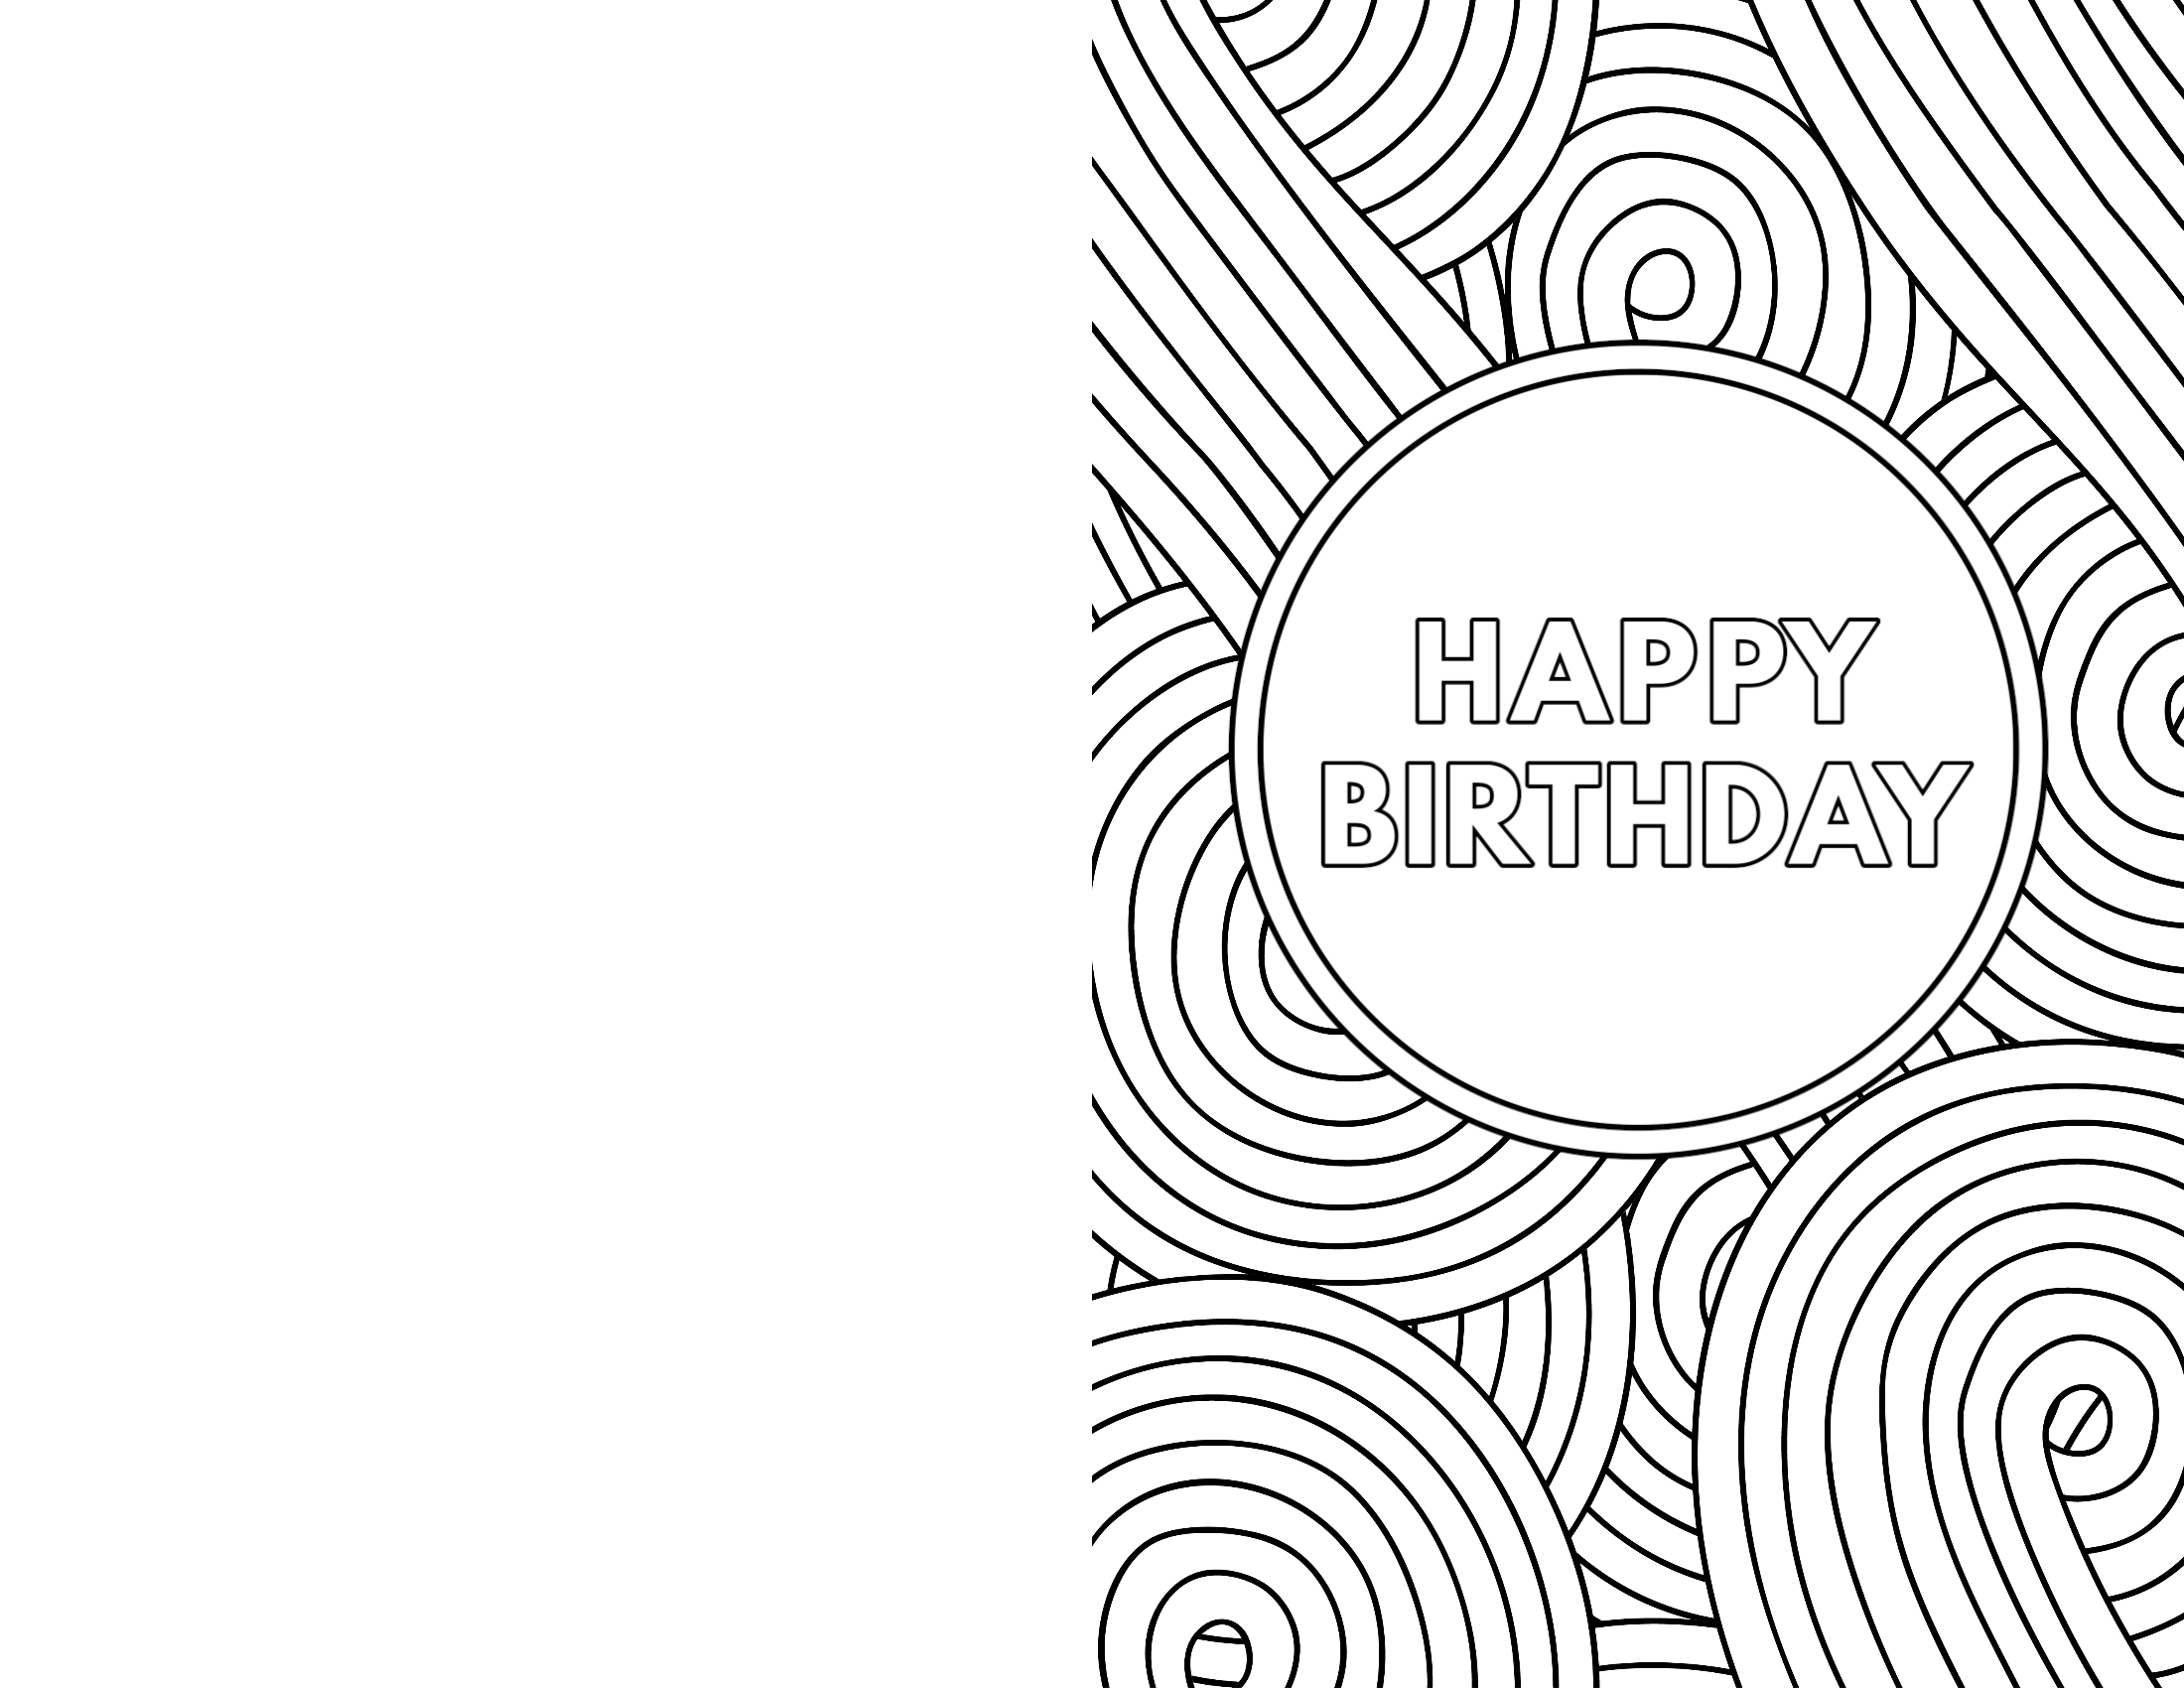 Spiderman - Free printable Printable Birthday Cards For Kids To Color for kids